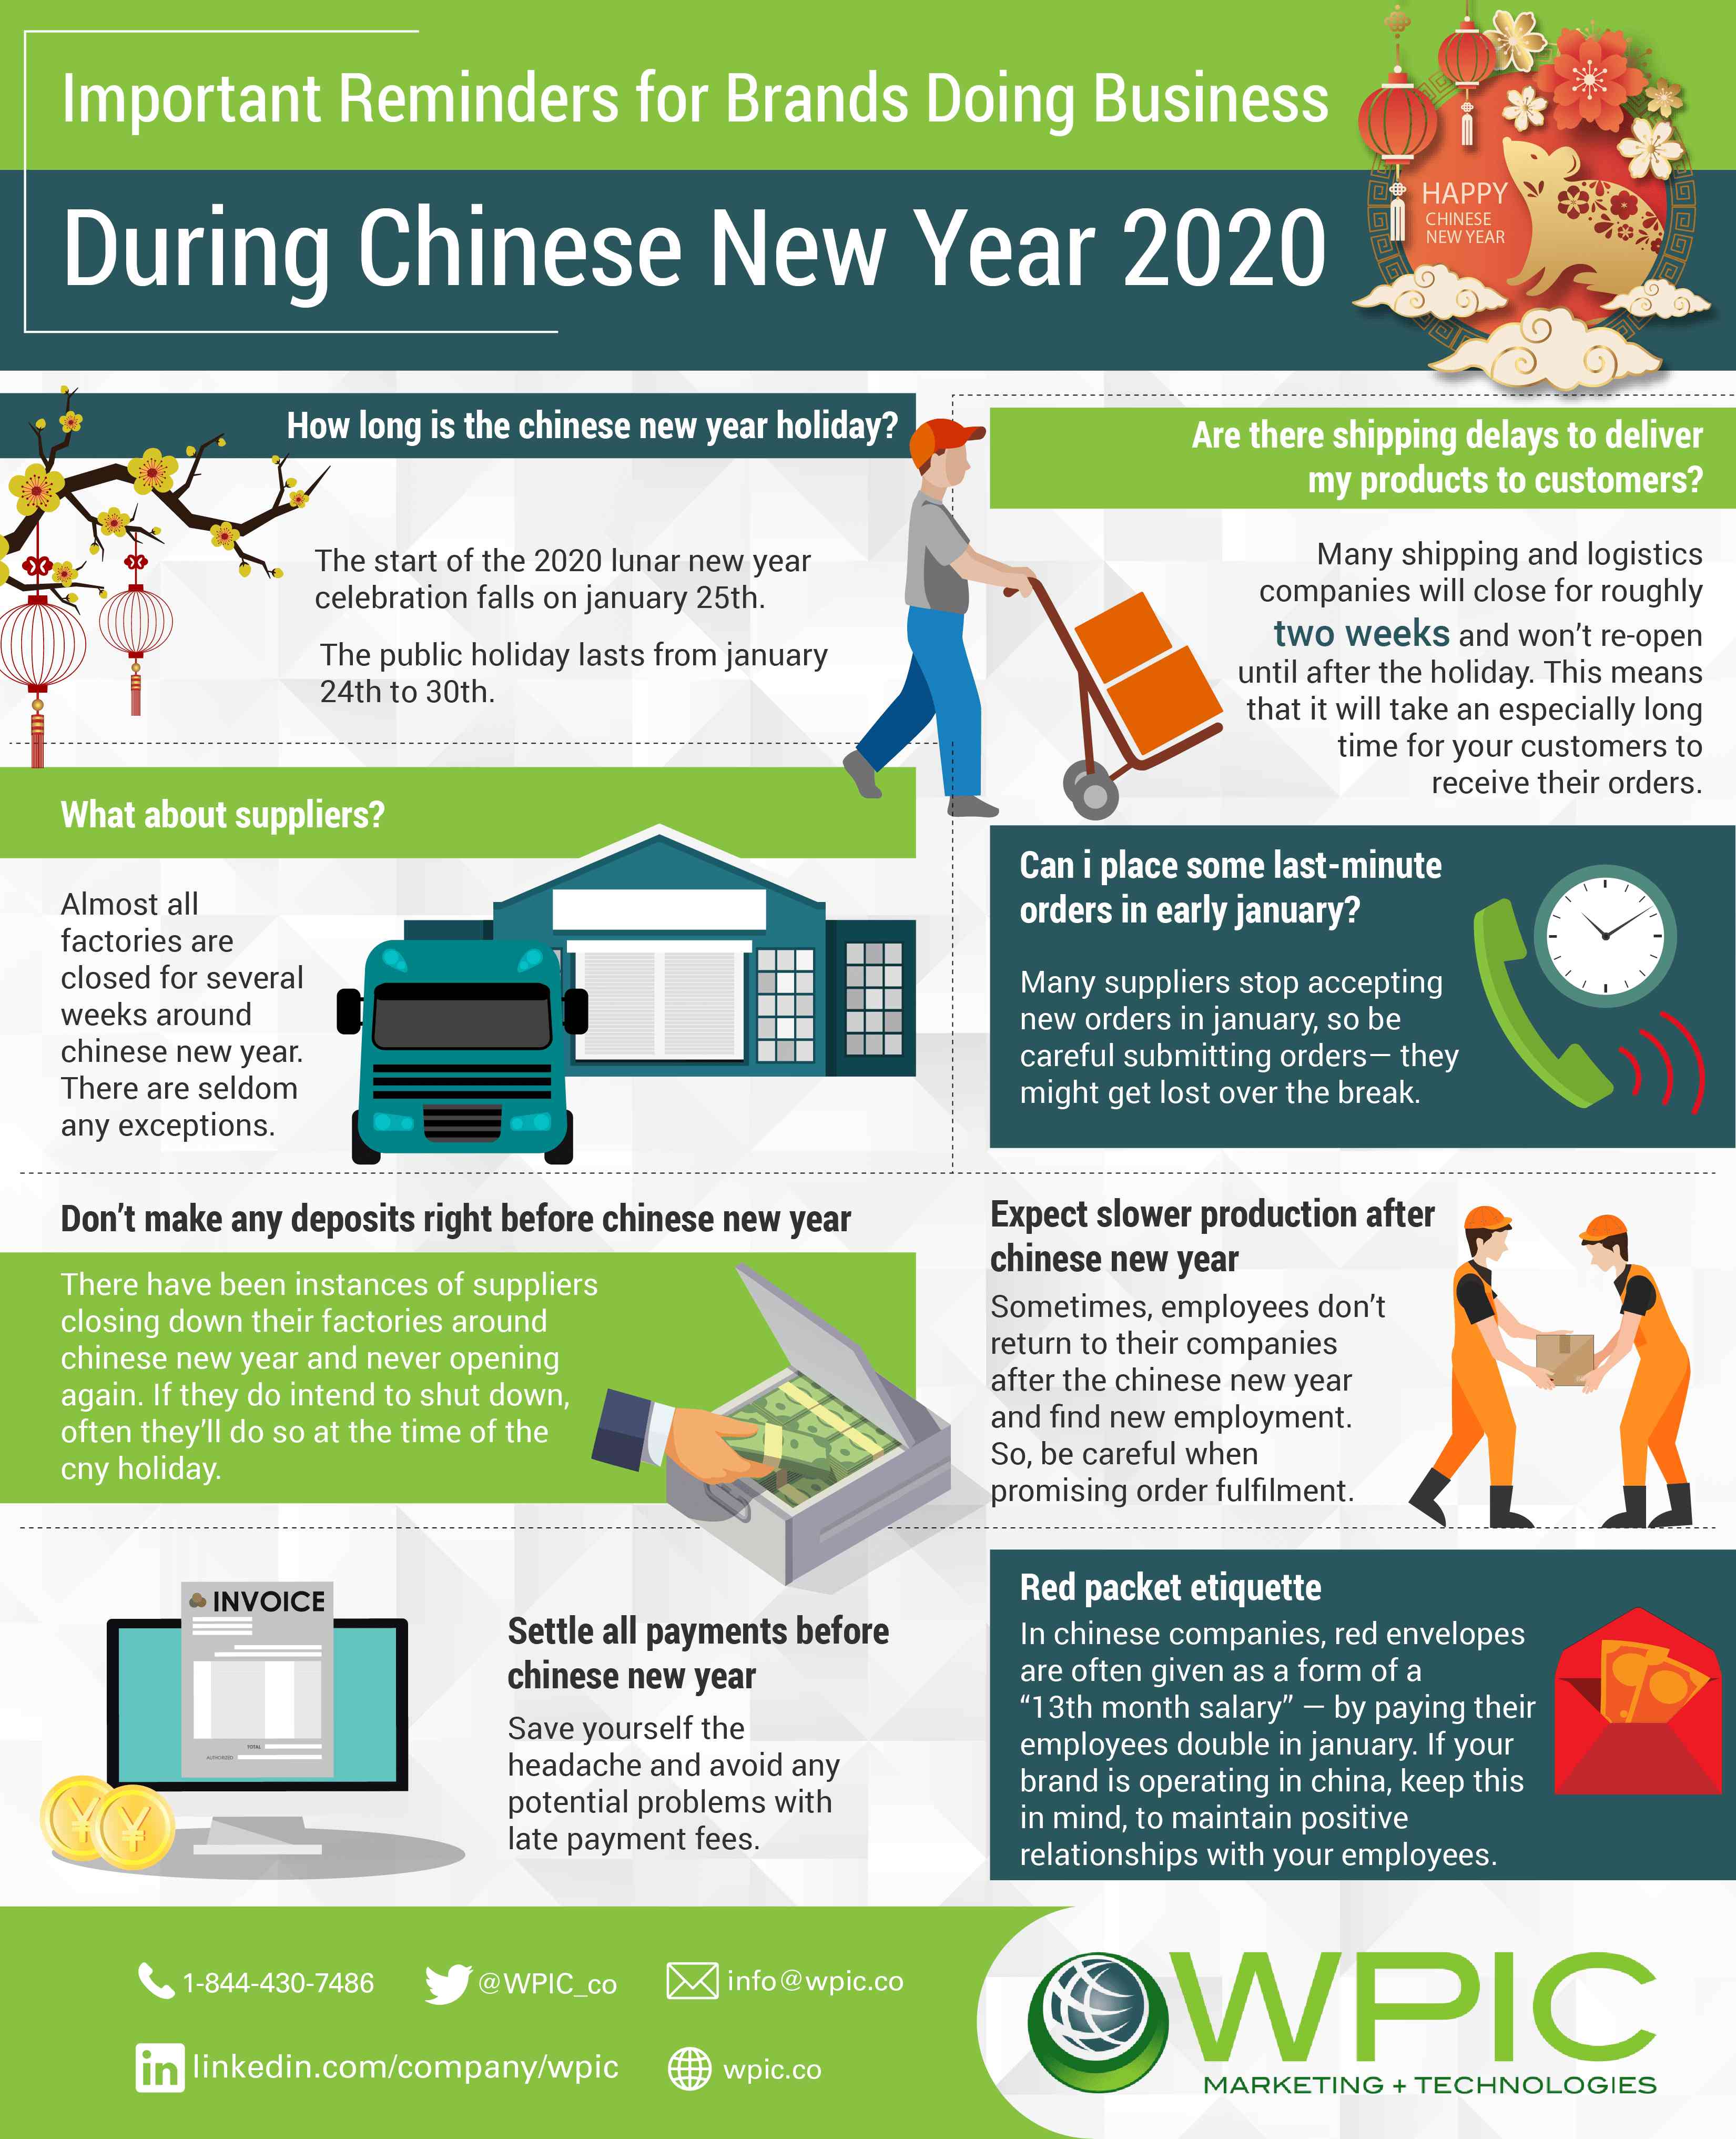 Important reminders for brands doing business during Chinese New Year 2020 infographic